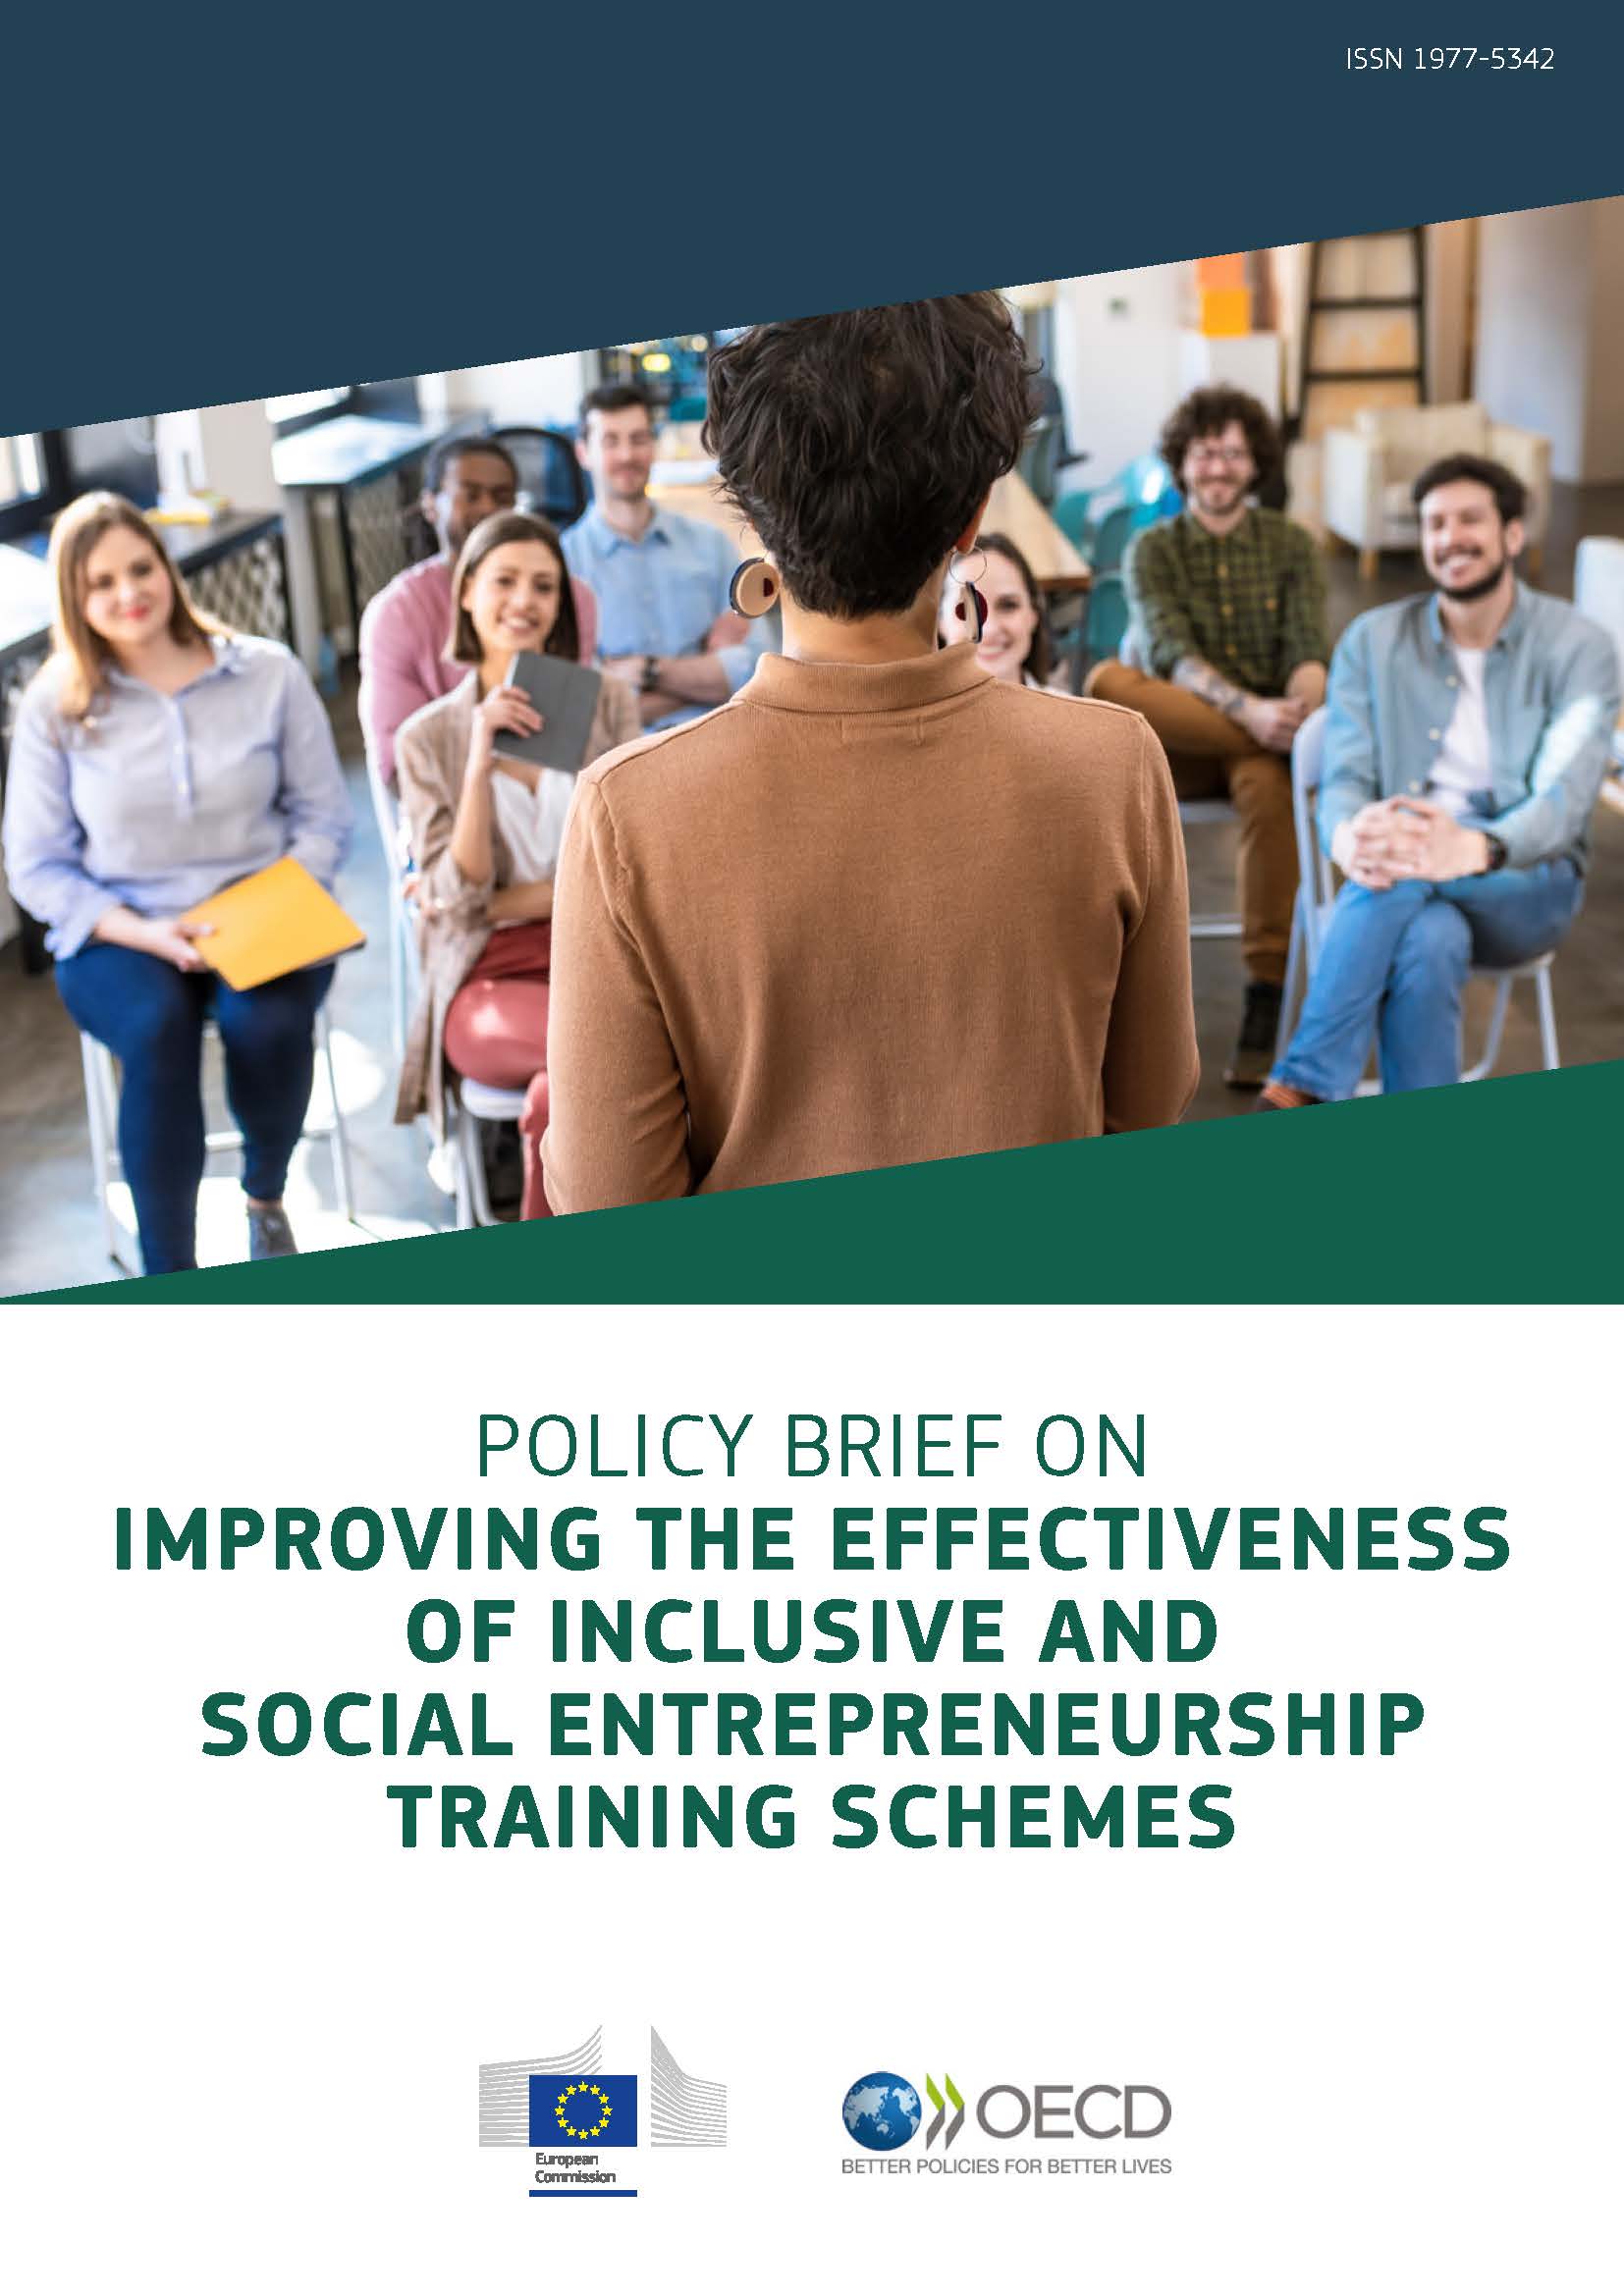 Policy Brief on improving the effectiveness of inclusive and social entrepreneurship training schemes